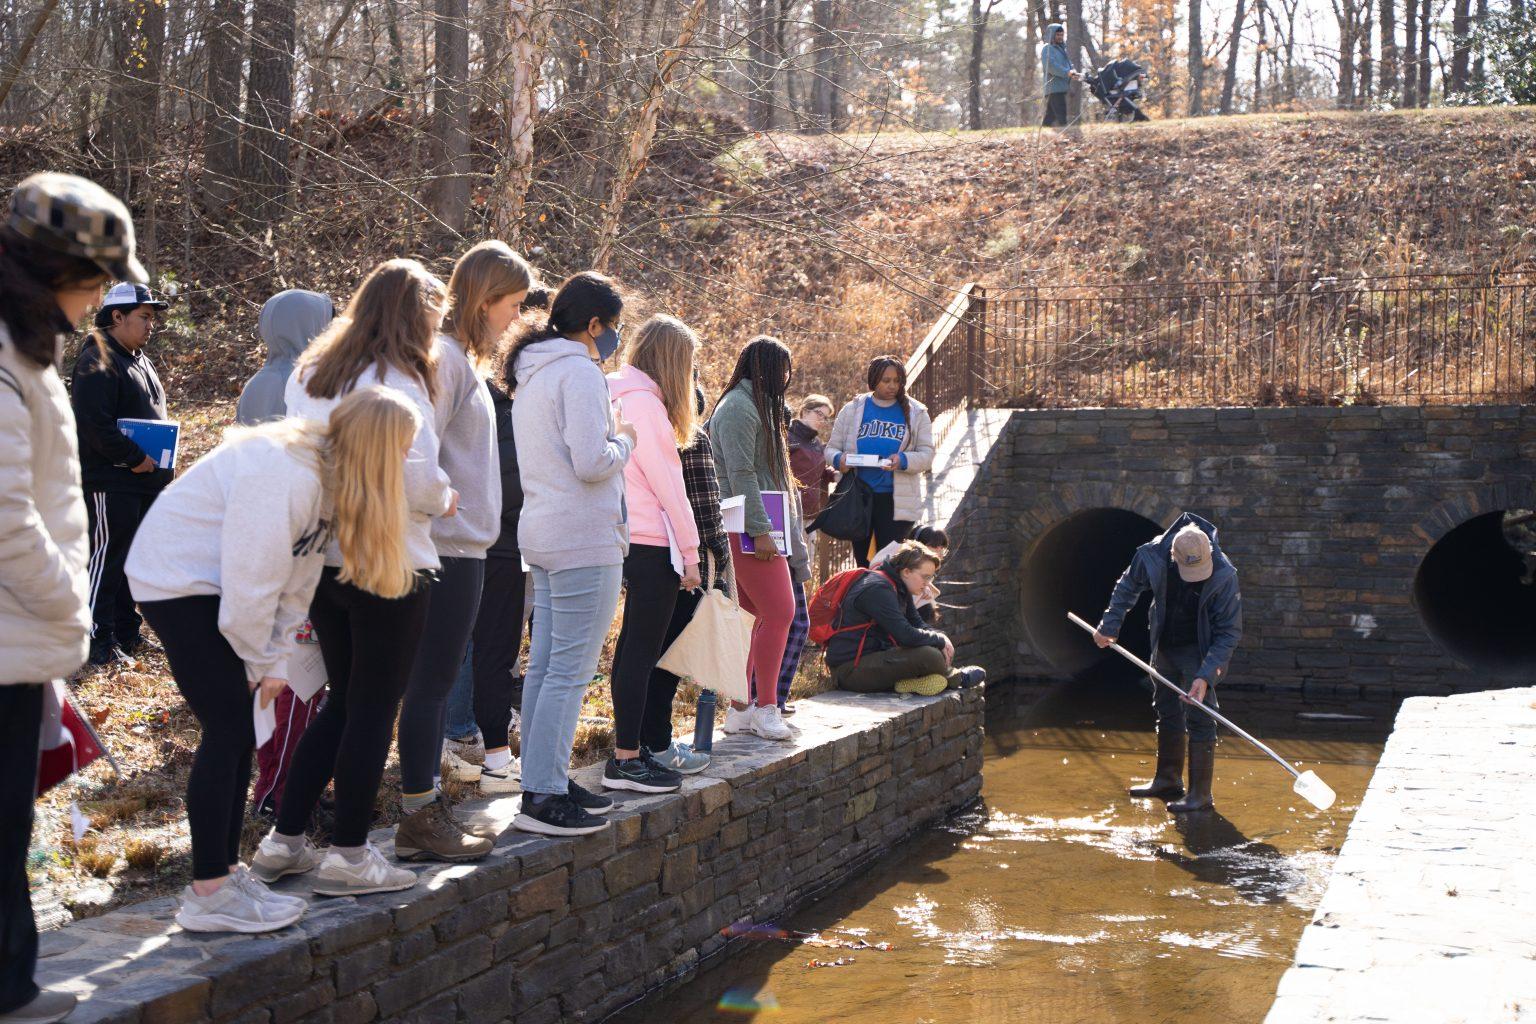 Testing water quality near the Duke Reclamation Pond with Duke professor Dr. Neal Flanagan